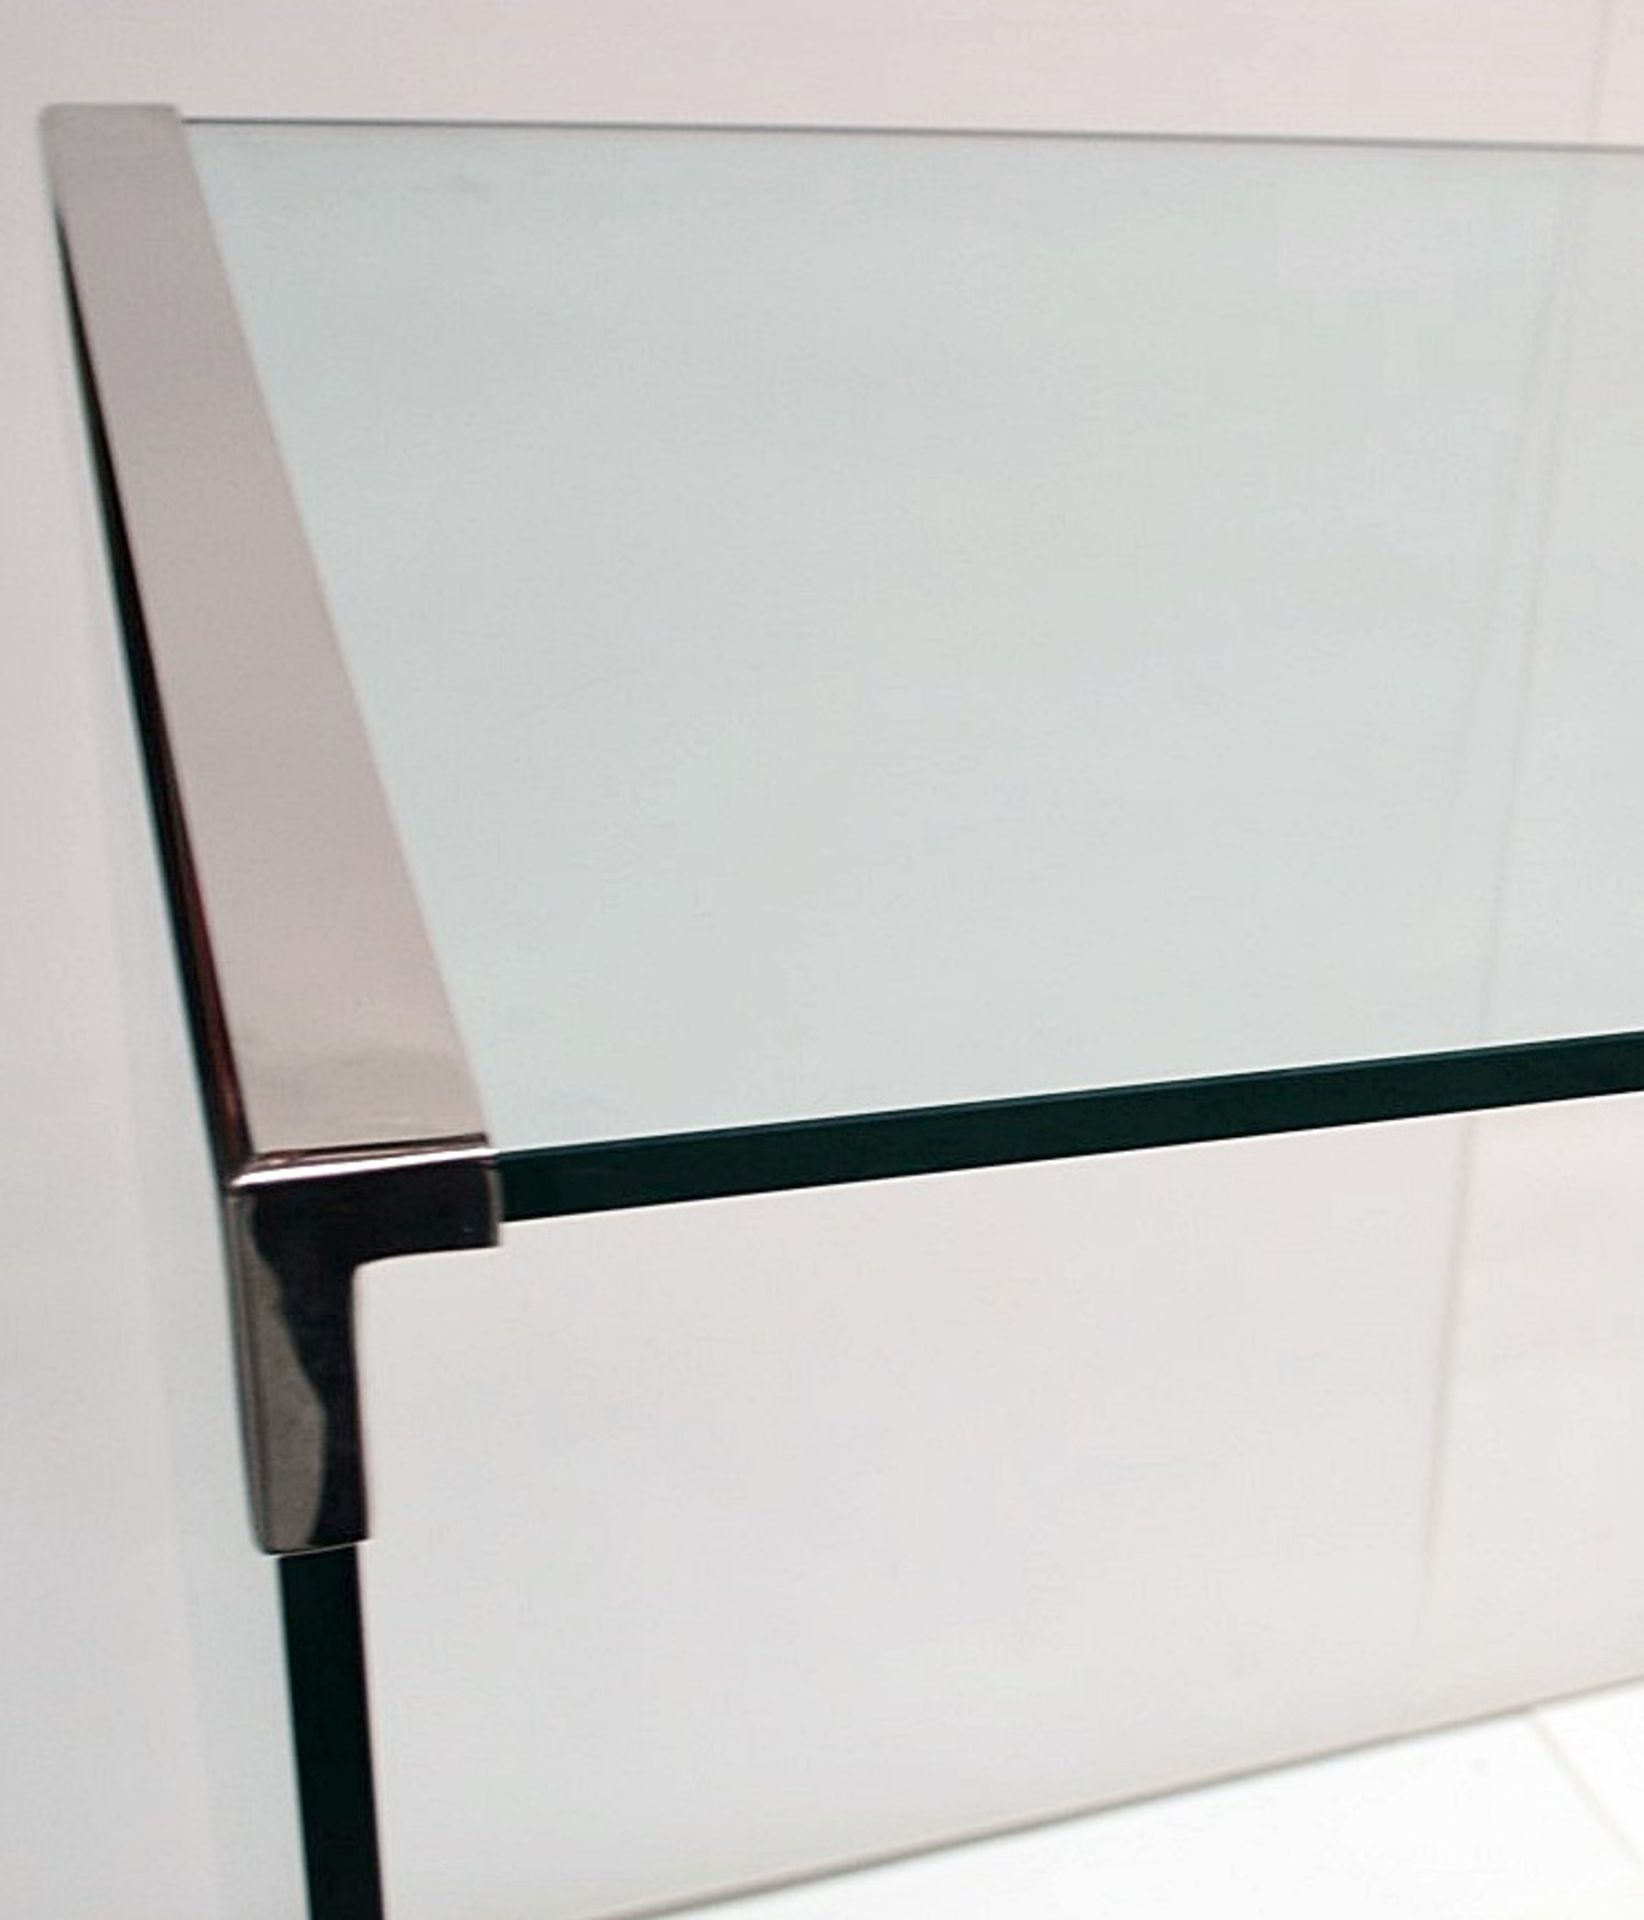 1 x FENDI Canova Glass Console Table With Chromed Corners - Dimensions: W170 x D65 x H99cm, Glass - Image 6 of 10